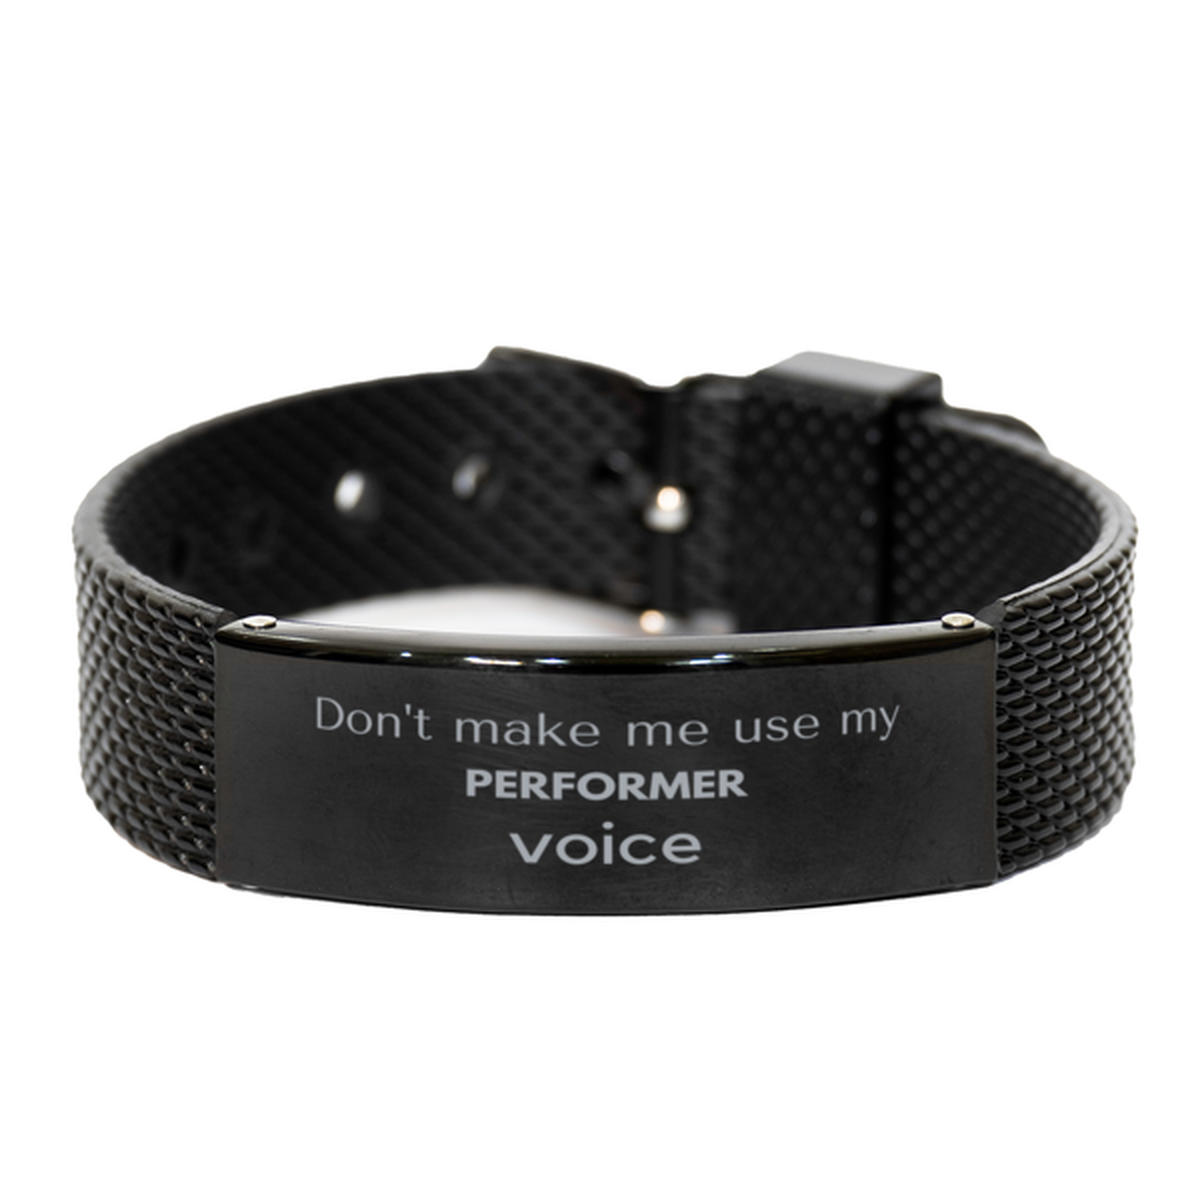 Don't make me use my Performer voice, Sarcasm Performer Gifts, Christmas Performer Black Shark Mesh Bracelet Birthday Unique Gifts For Performer Coworkers, Men, Women, Colleague, Friends